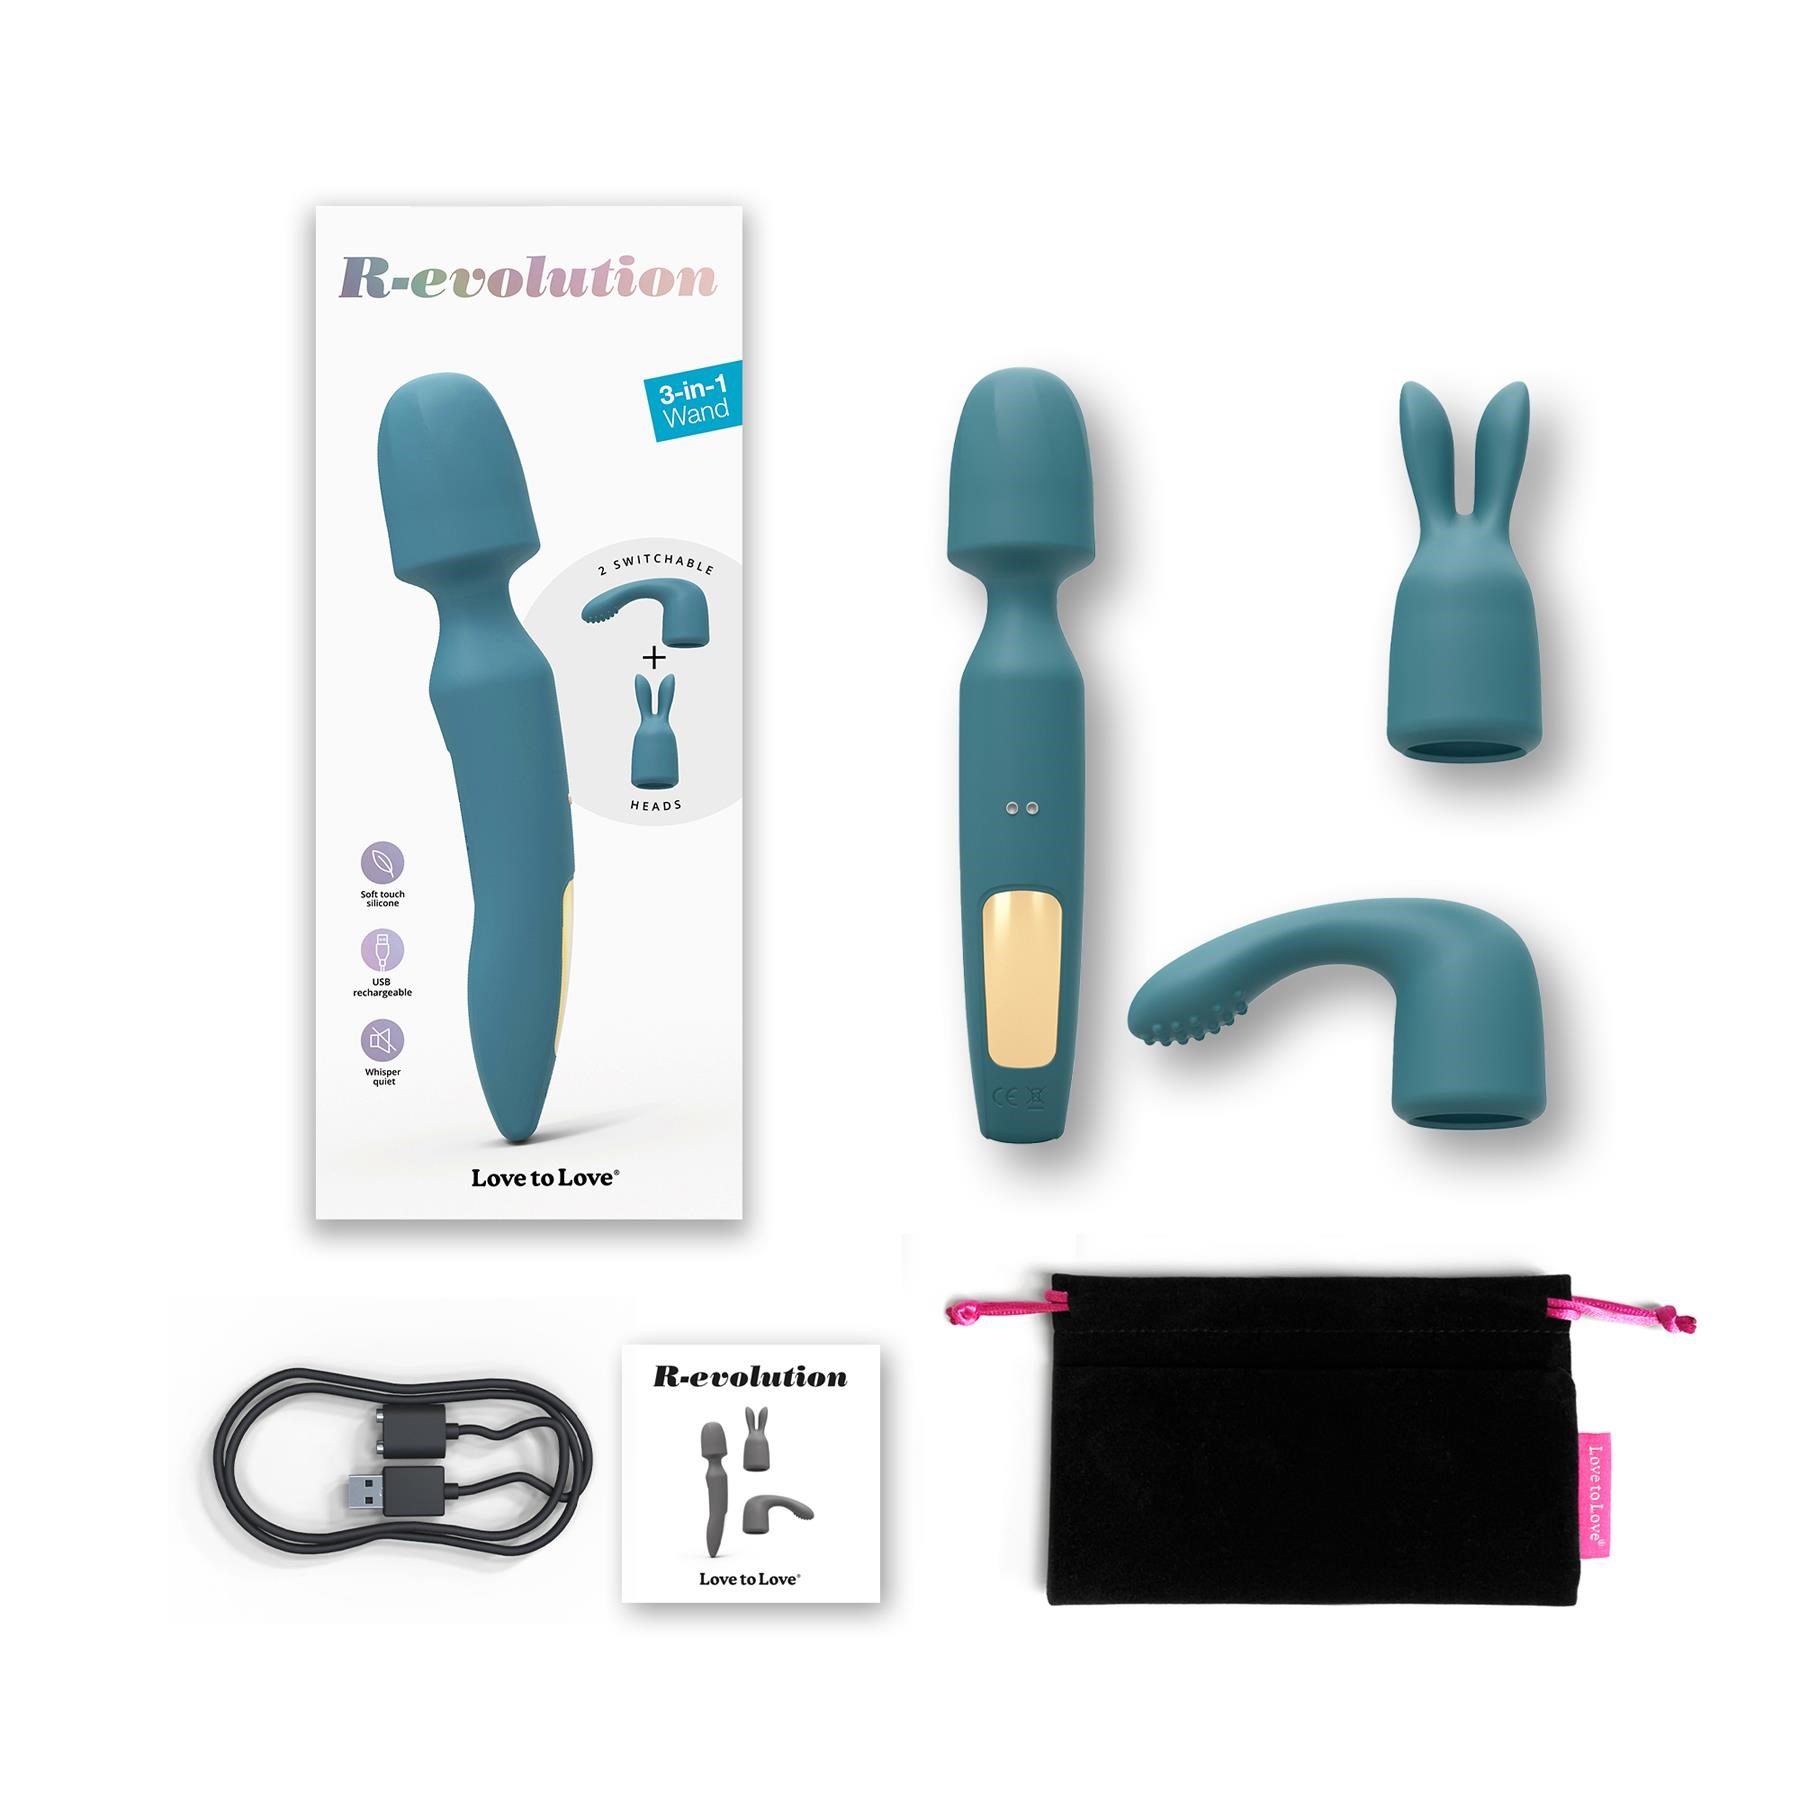 R-Evolution Wand Massager With Attachments - All Components and Packaging